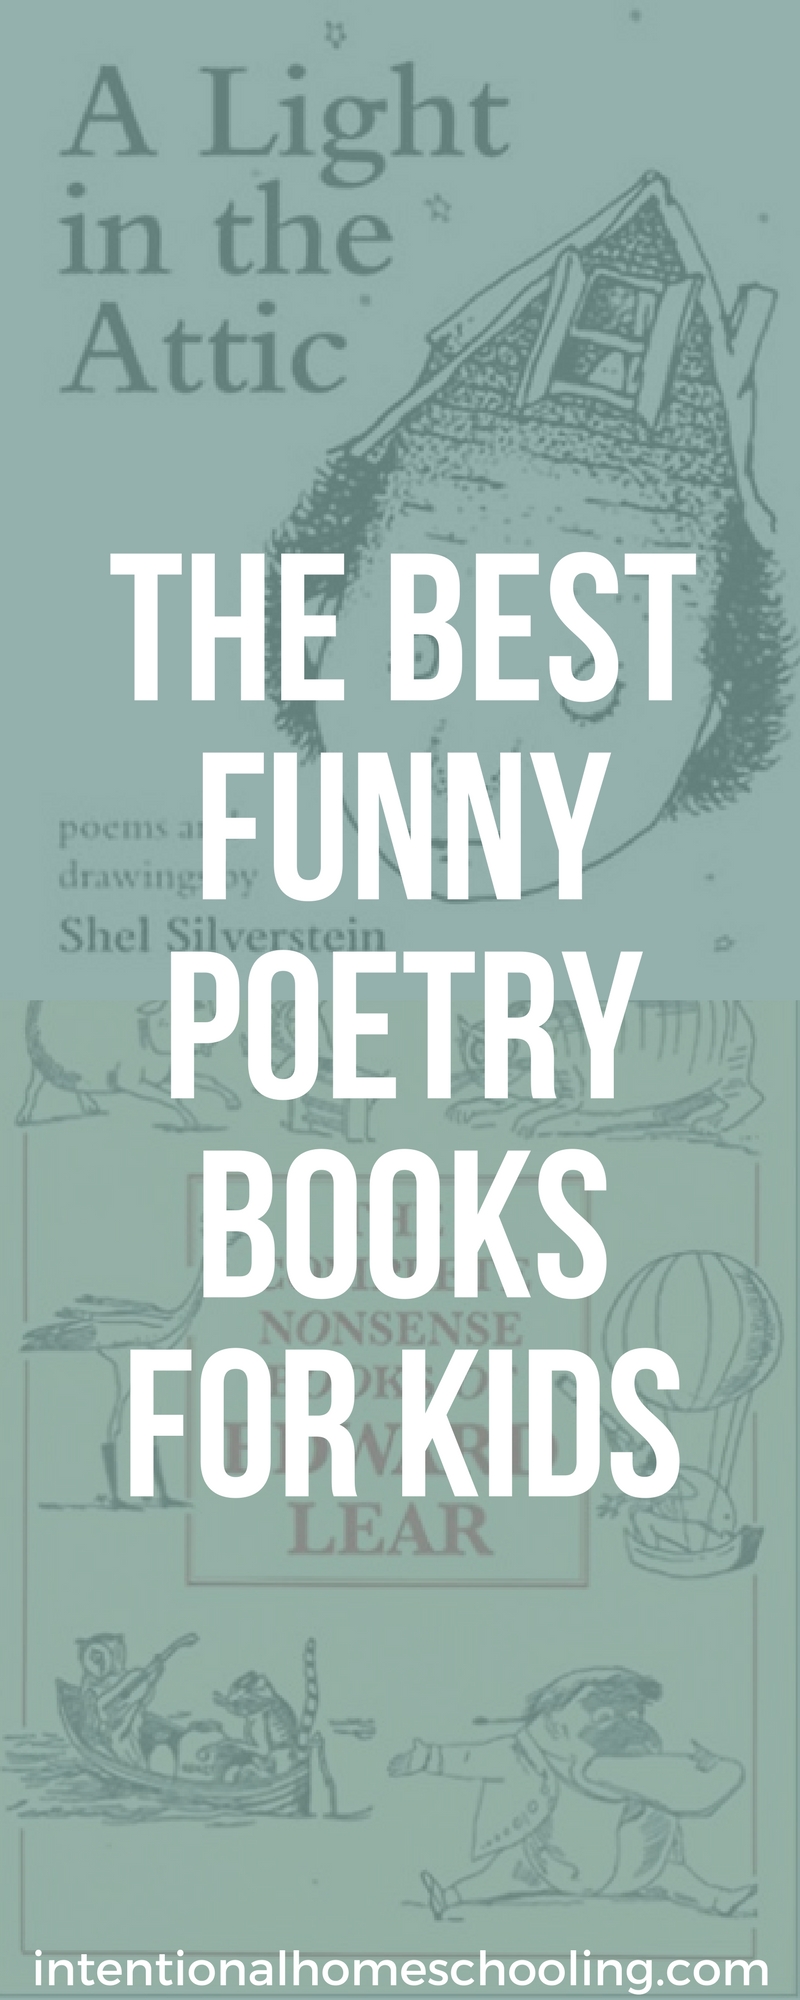 The Best Funny Poetry Books for Kids - Intentional Homeschooling